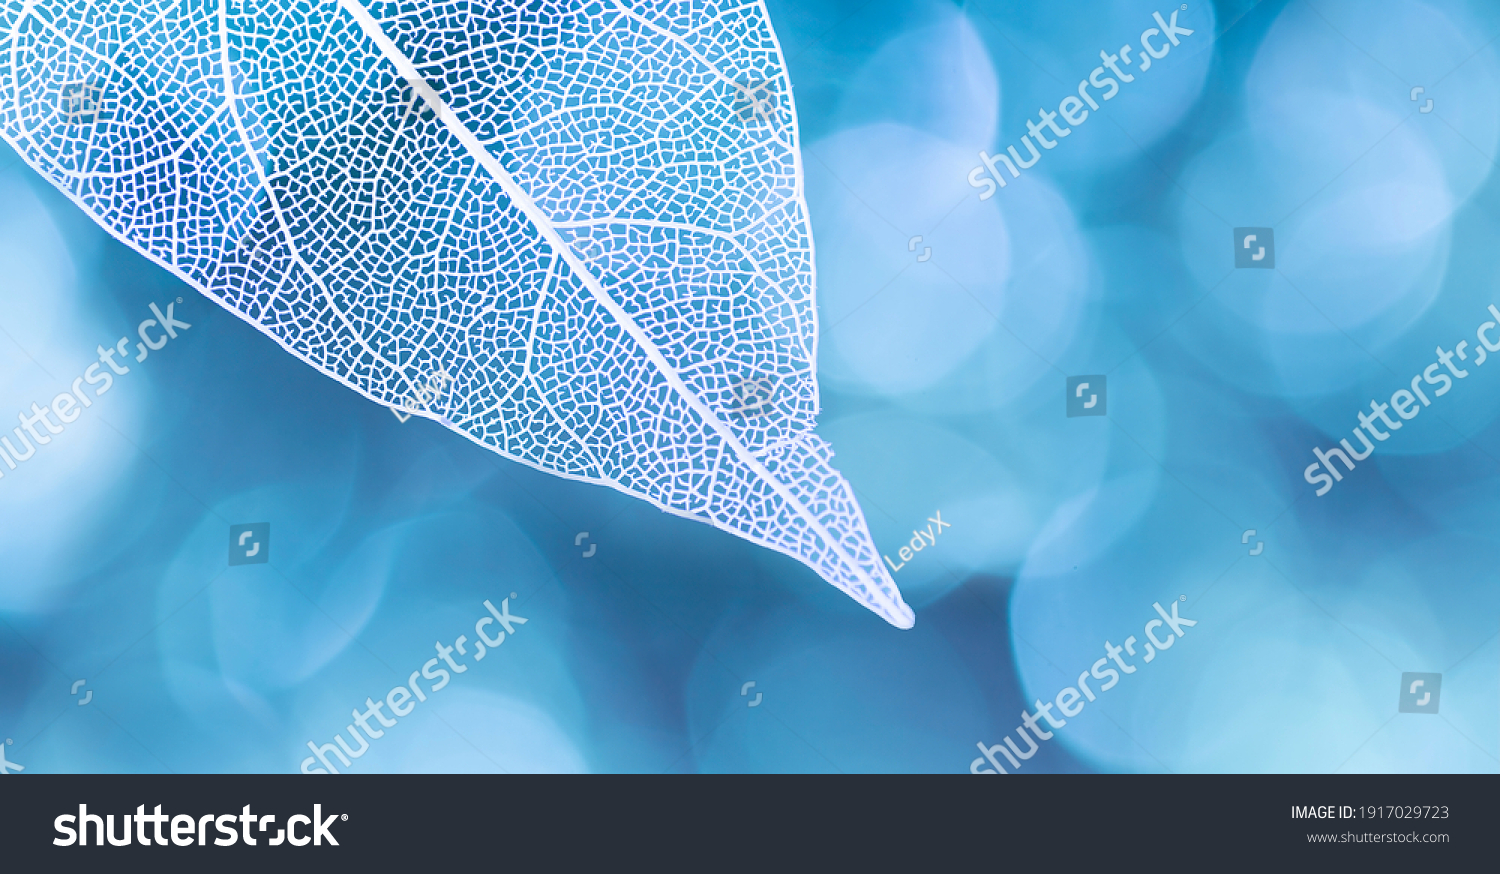 Beautiful white skeletonized leaf on light blue background with round bokeh. Expressive artistic image of beauty and purity of nature. #1917029723